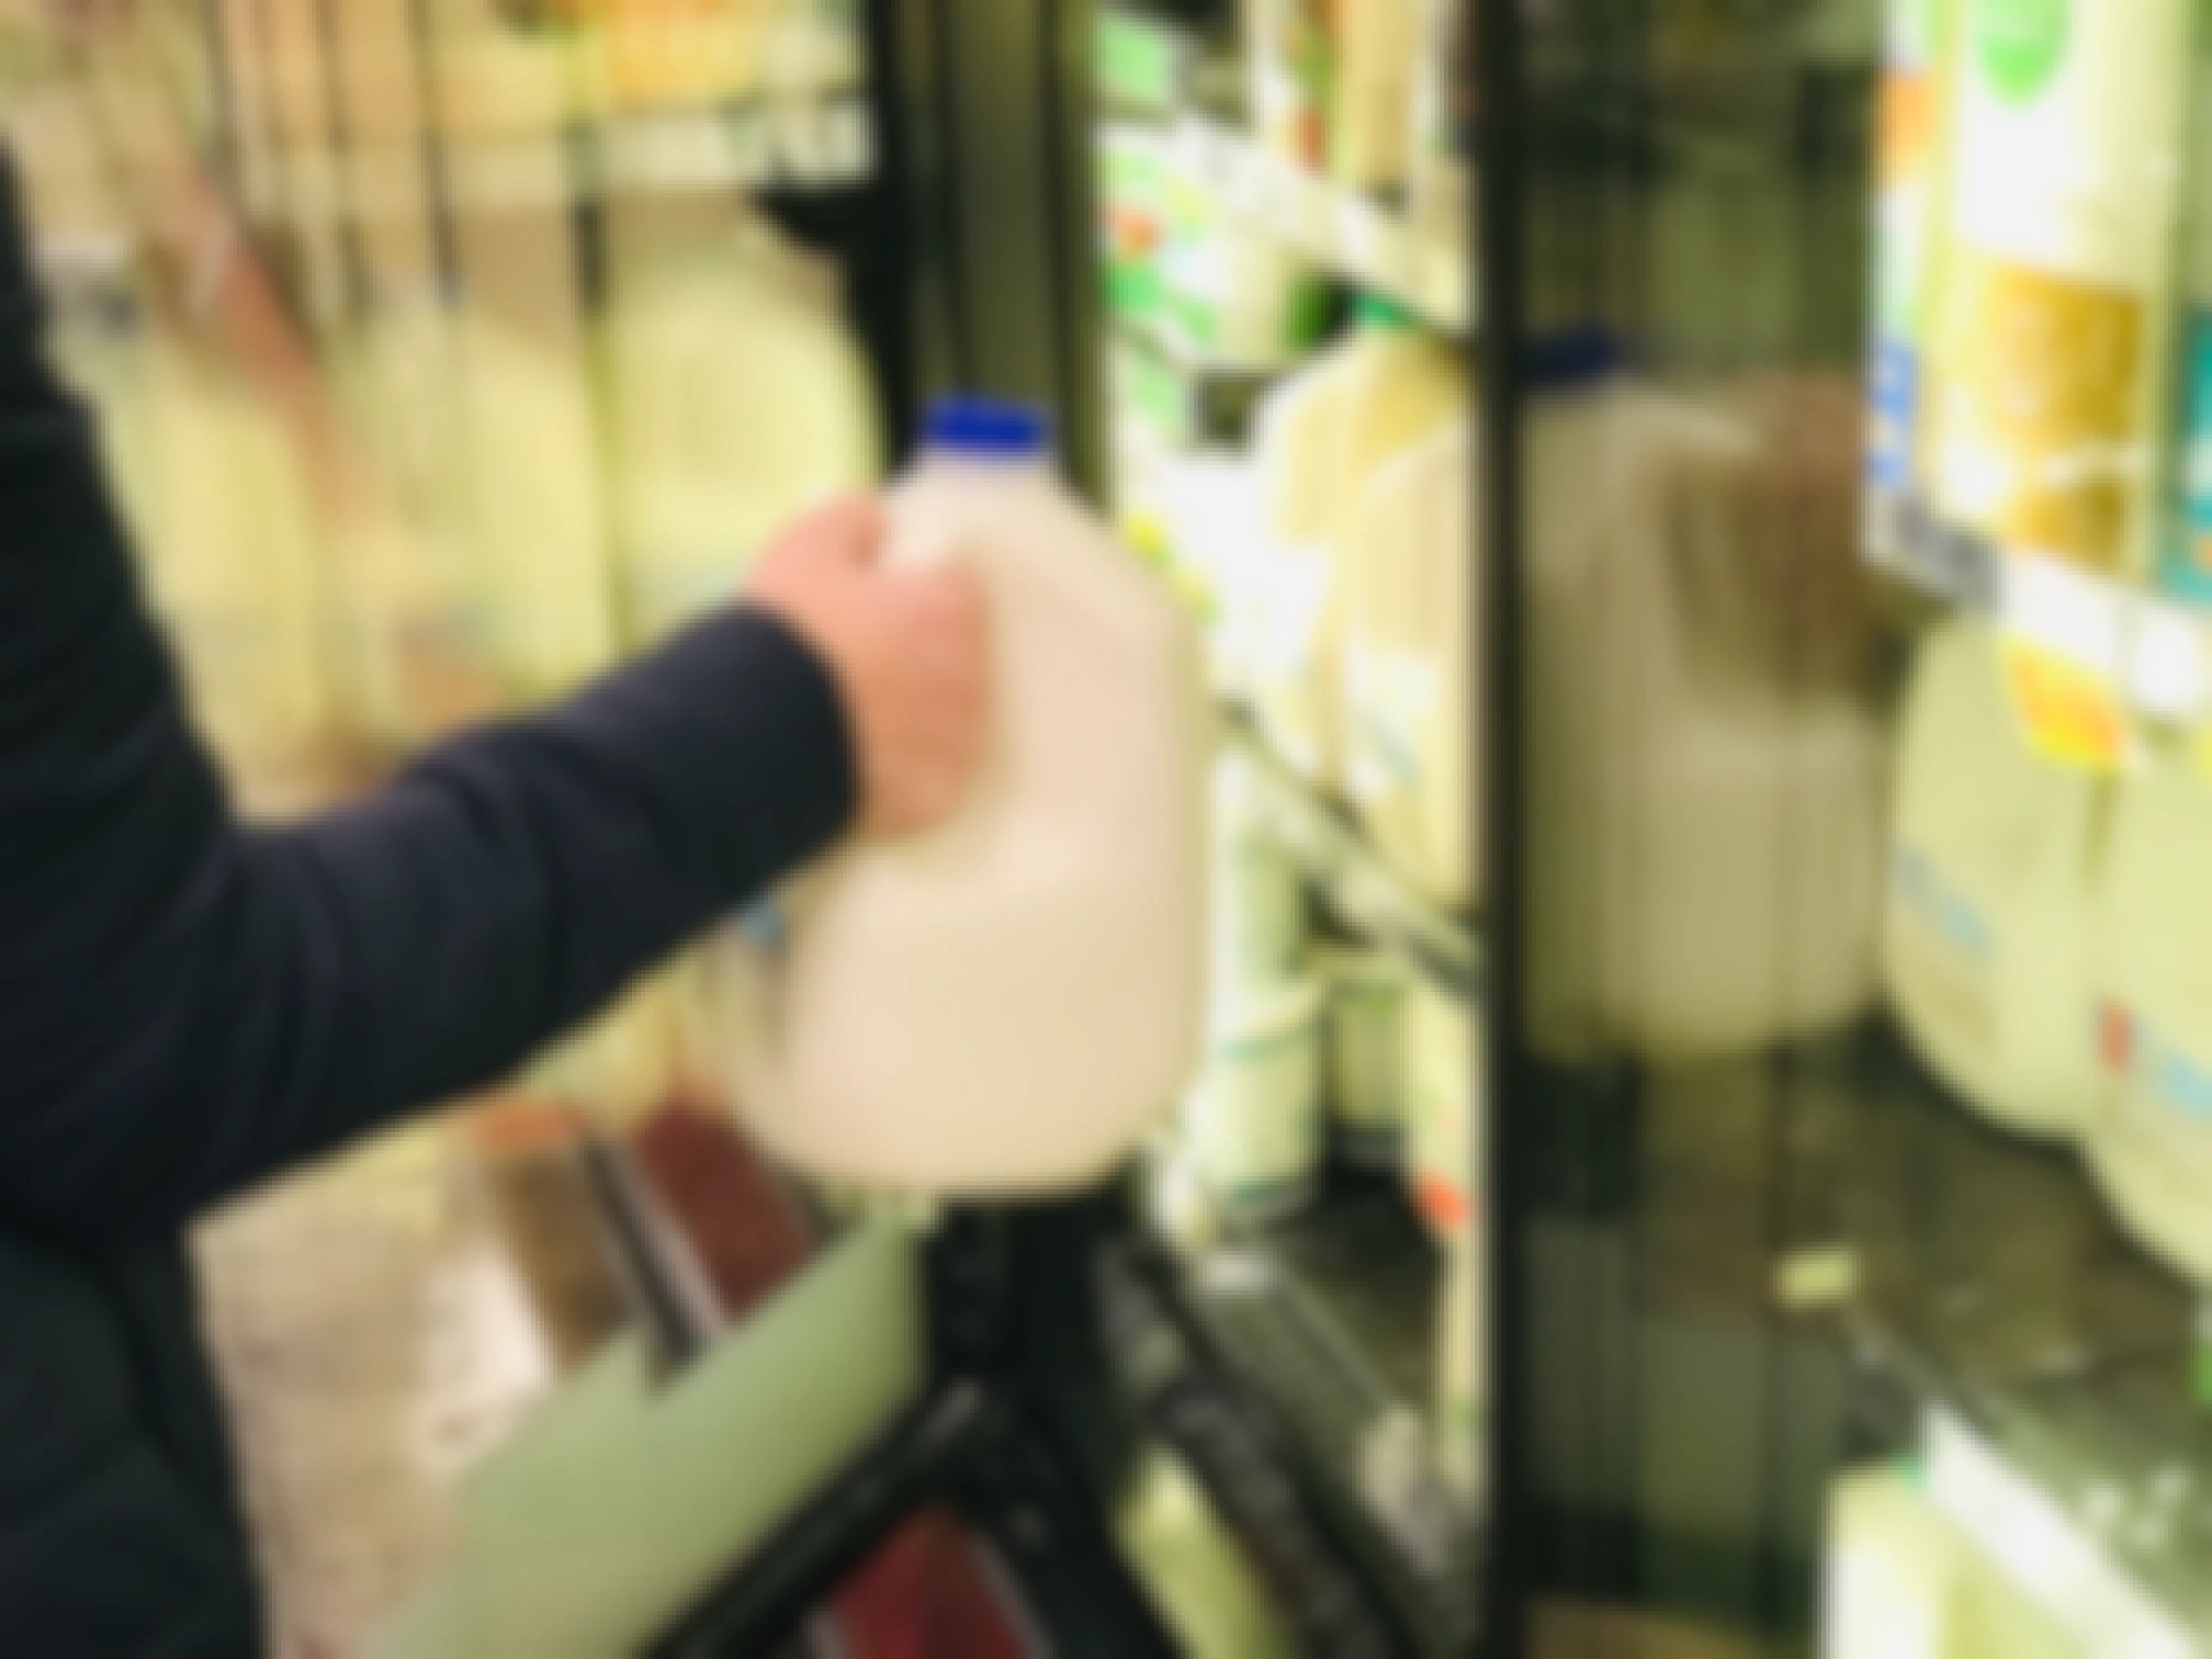 Hand reaching into a grocery refrigeration case to grab a gallon of milk.